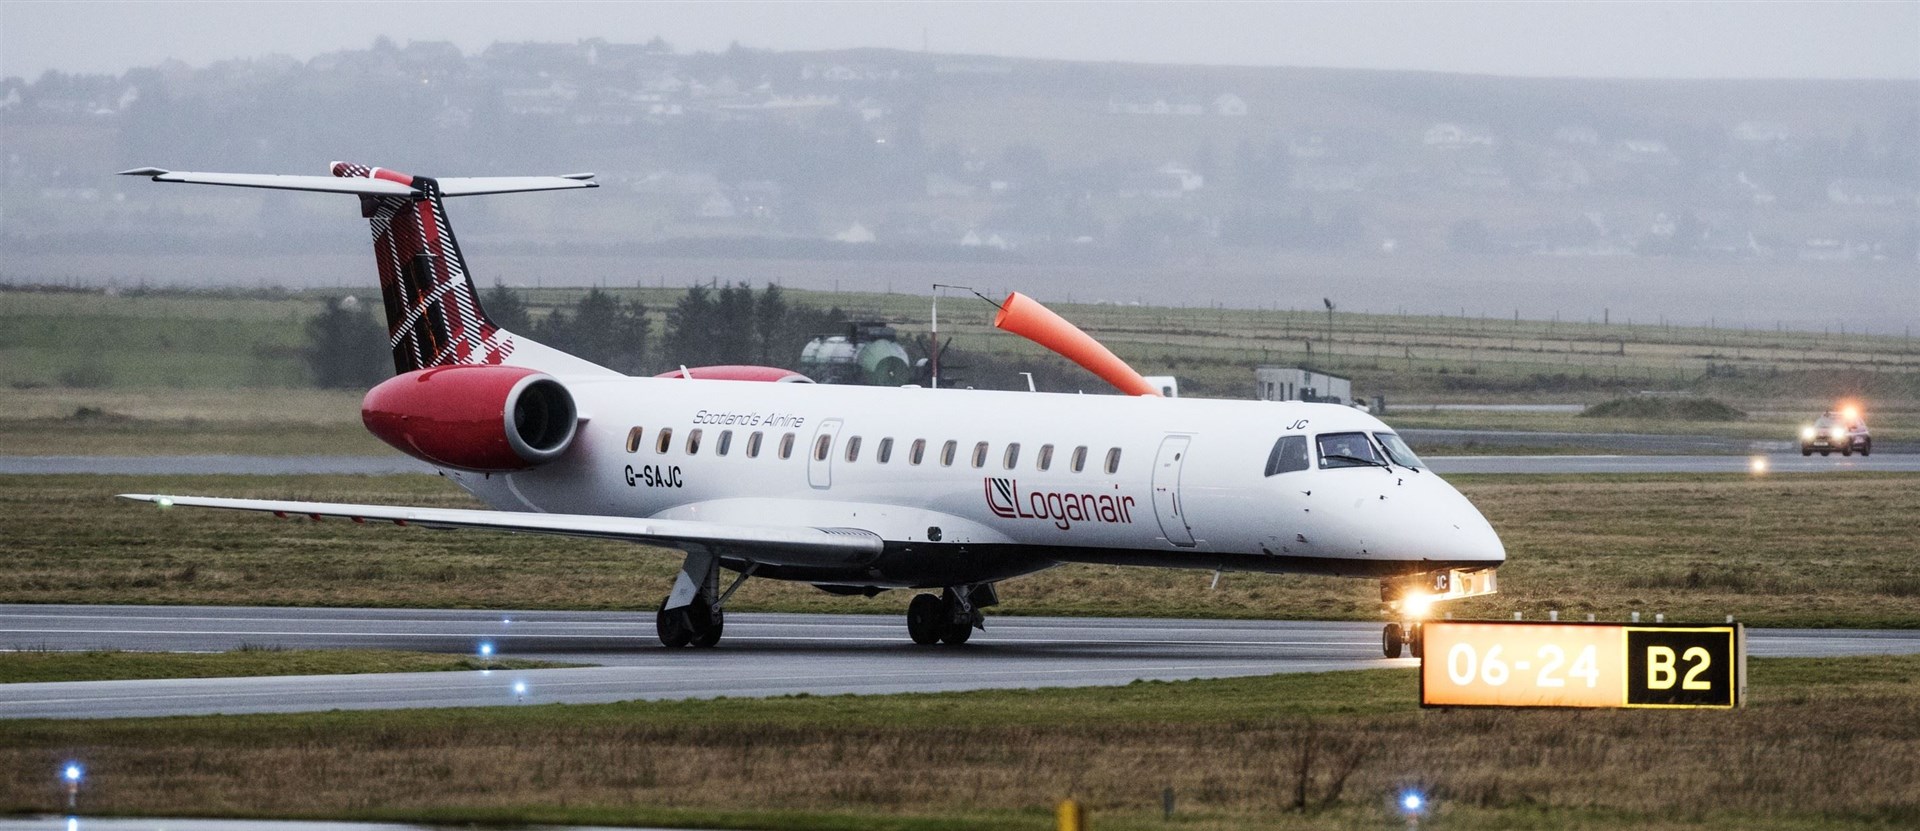 Up to date with a Loganair Embraer 145 passenger jet.